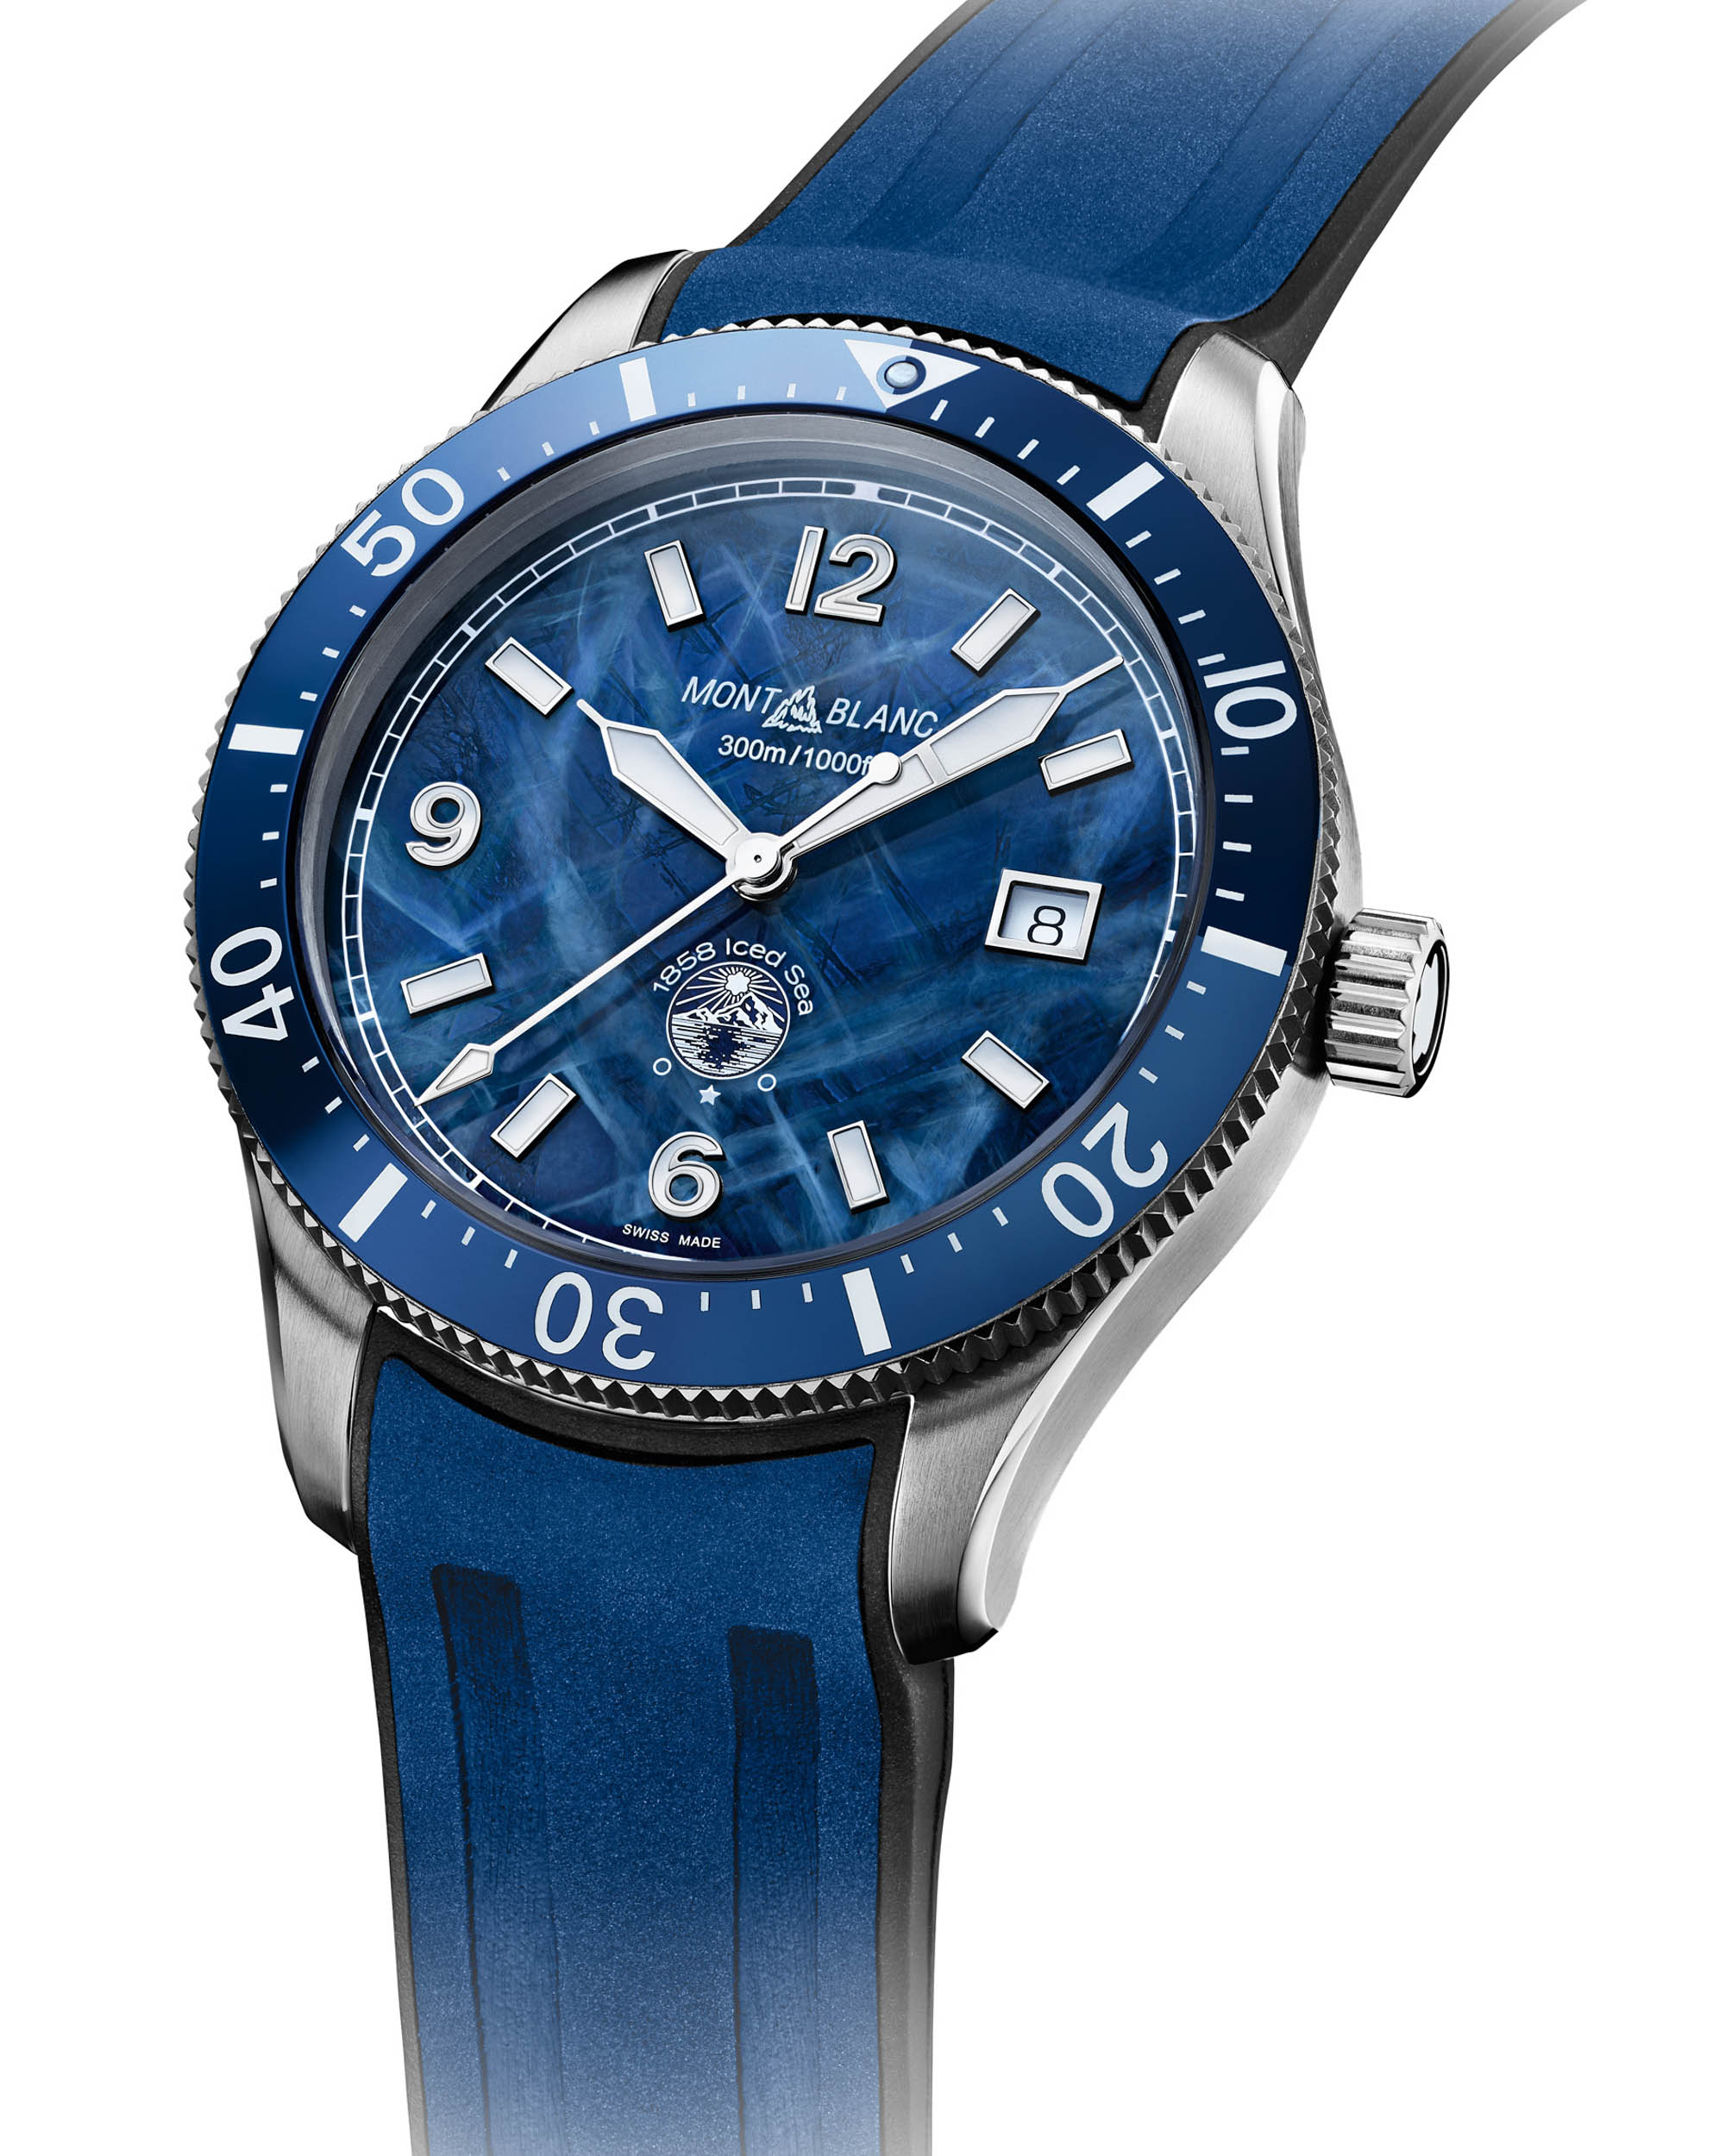 Montblanc 1858 Iced Sea Automatic Date Watch For 2022 | aBlogtoWatch